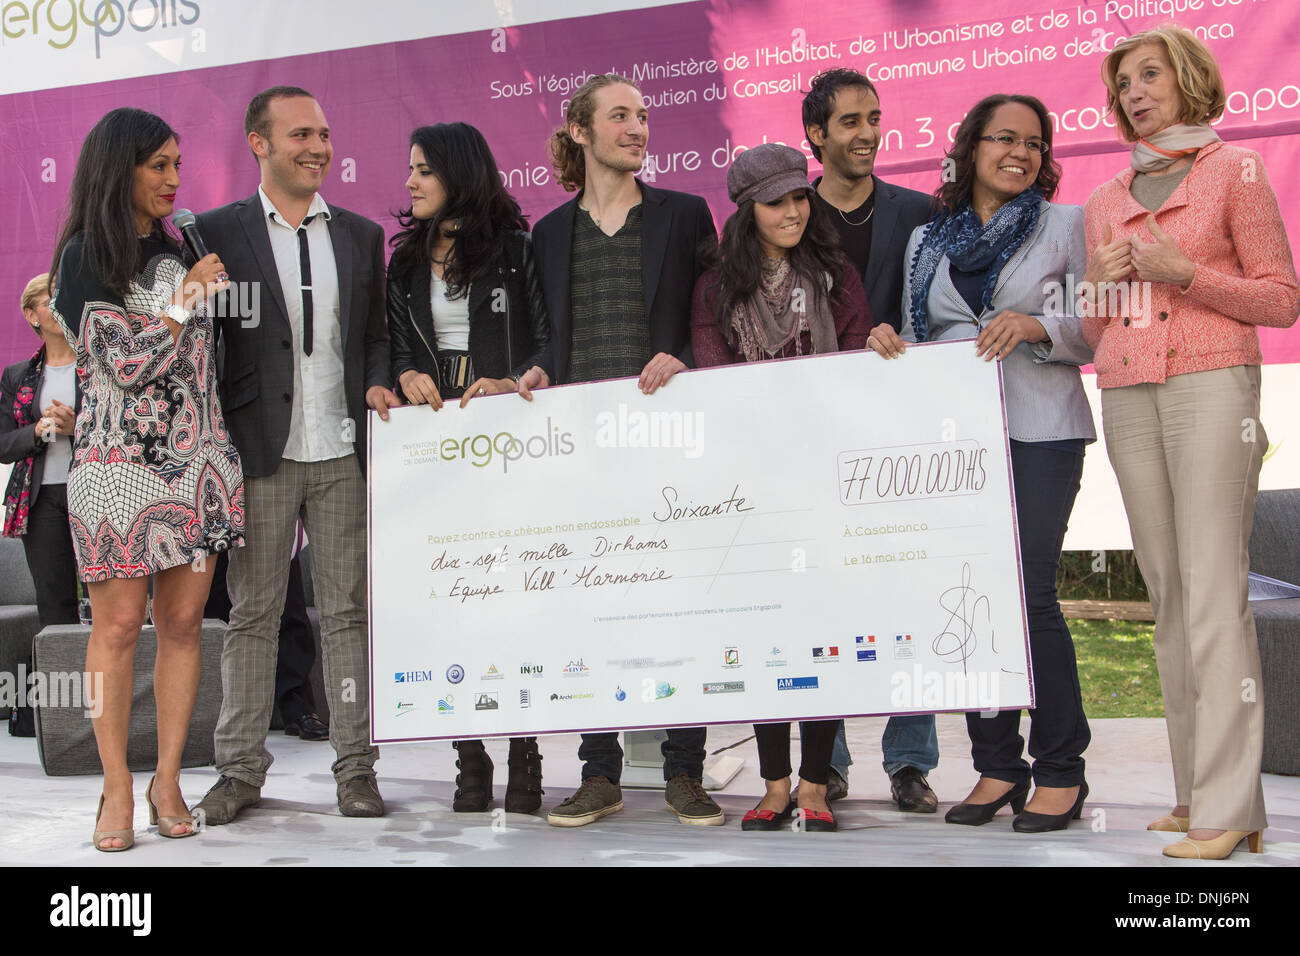 NICOLE BRICQ (RIGHT), MINISTER FOR FOREIGN TRADE, WITH STUDENTS FROM THE VILL'HARMONIE TEAM, WINNERS OF THE ERGAPOLIS COMPETITION, AND ESTELLE FORGET (LEFT), FOUNDER OF ERGAPOLIS, CASABLANCA, MAY 16, 2013 Stock Photo